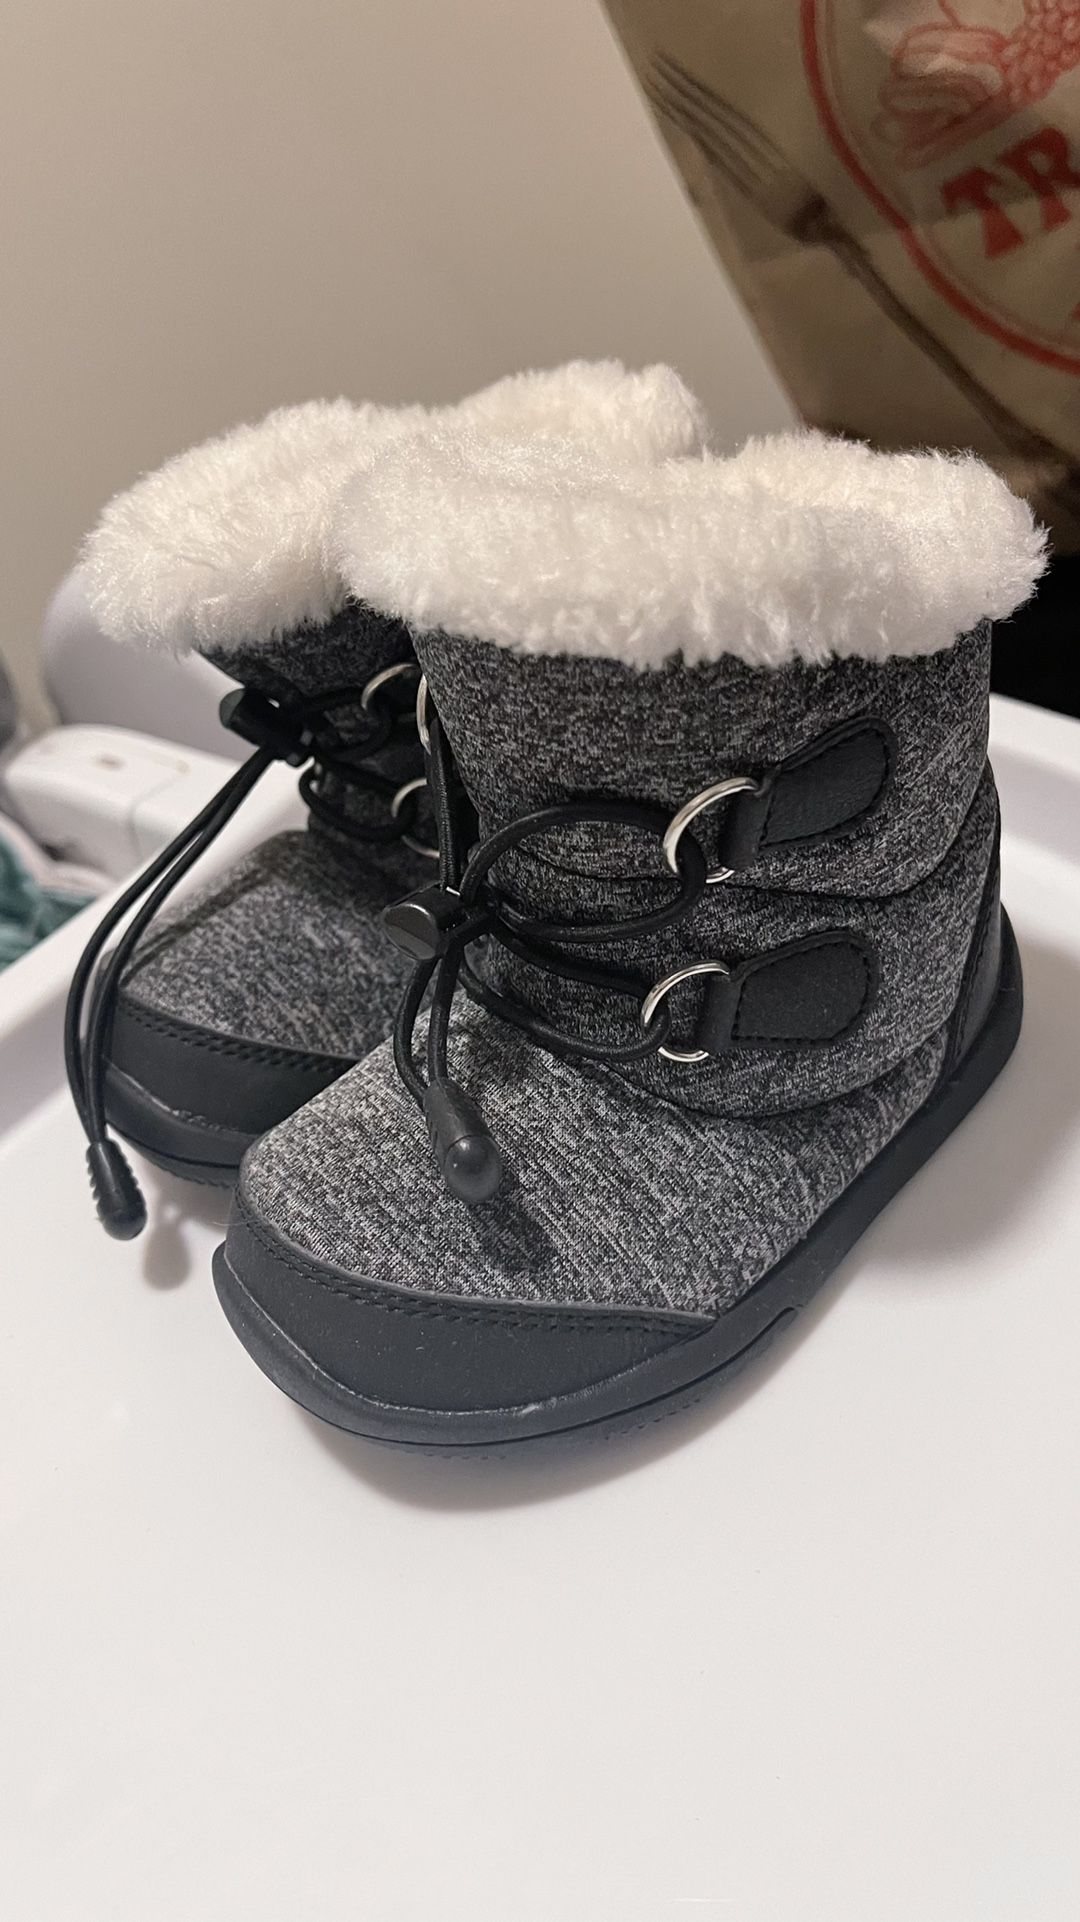 boots for babies